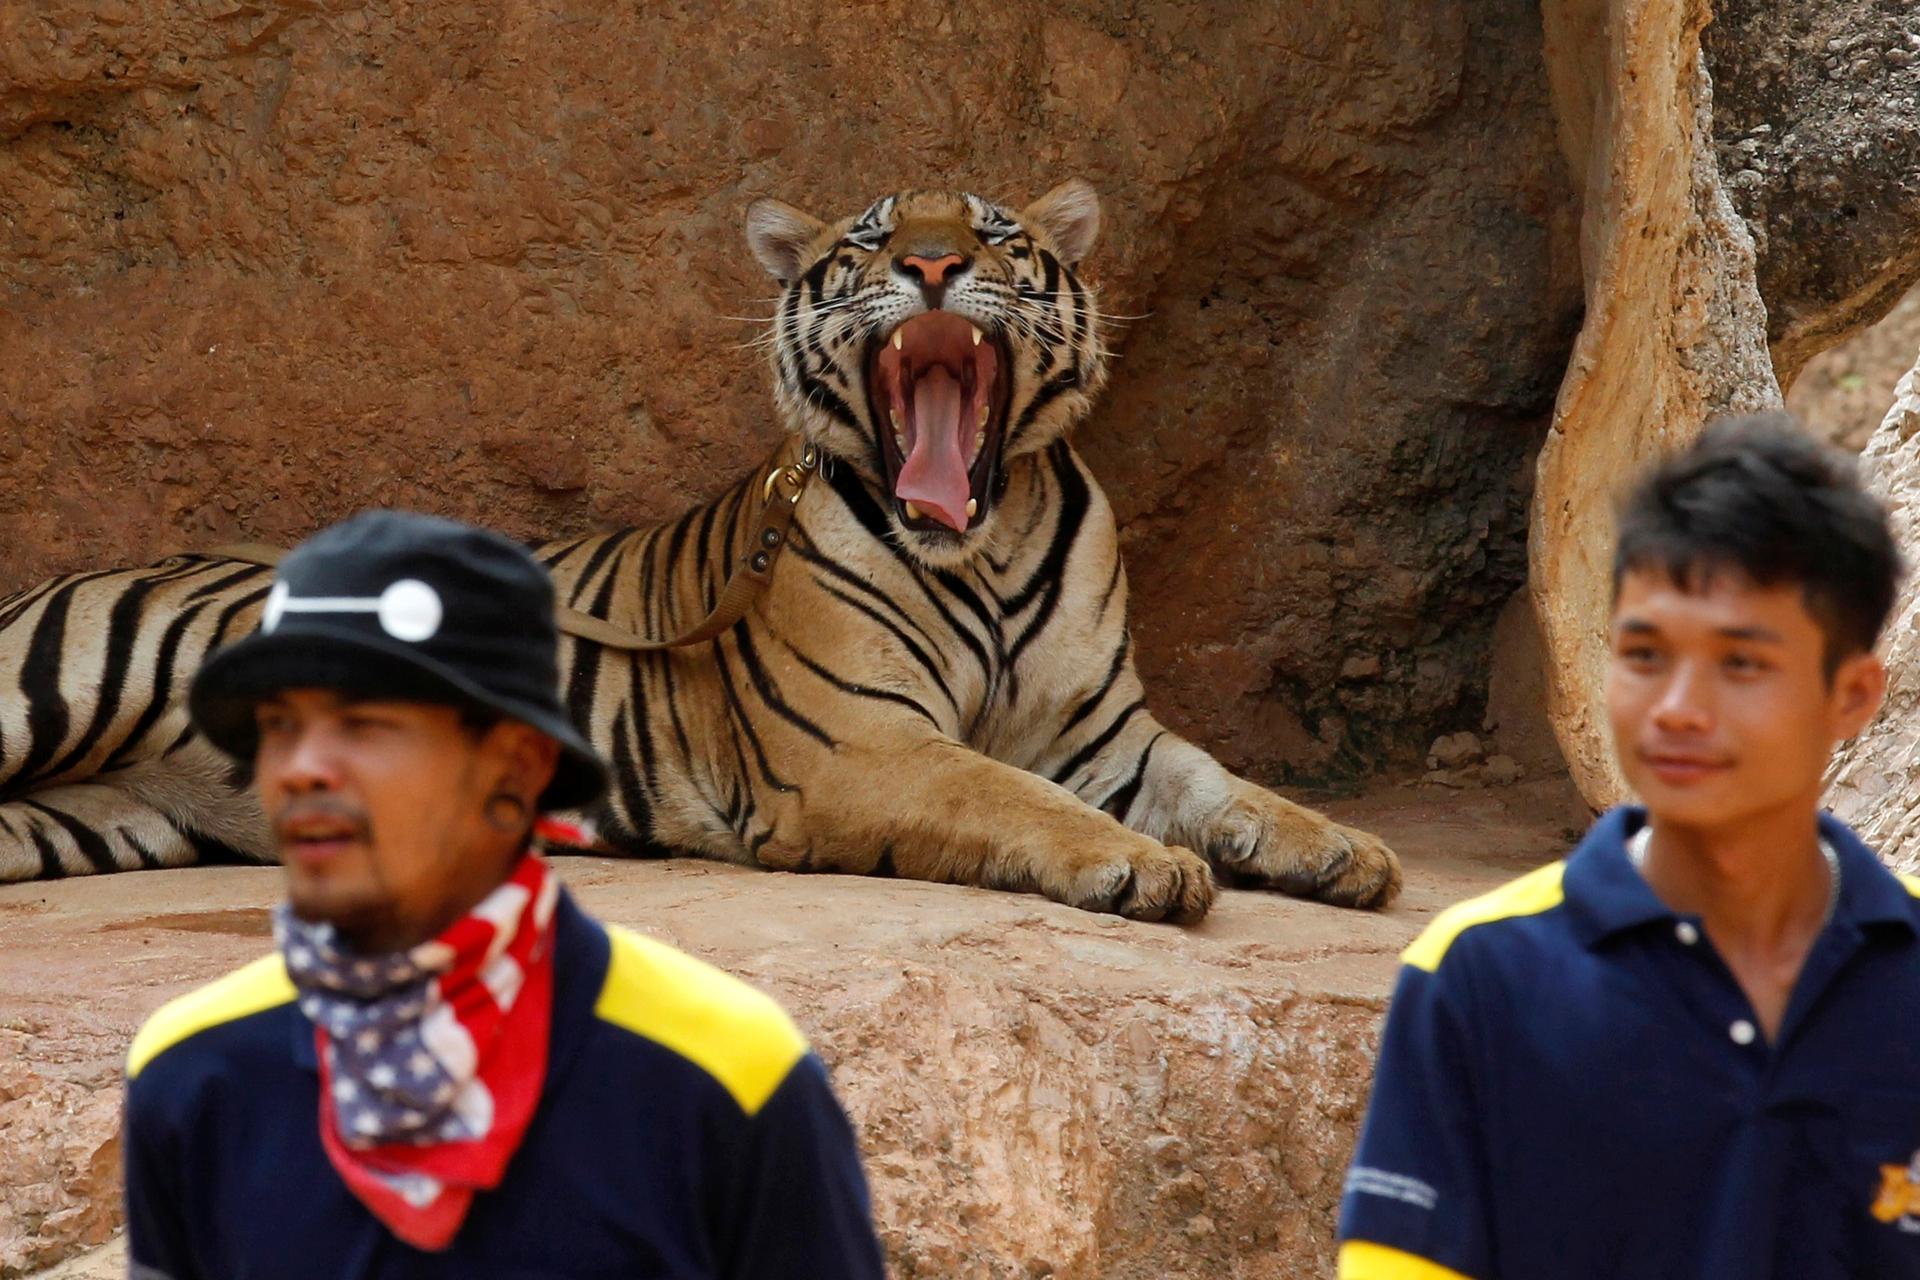 A tiger yawns before officials start moving them from Thailand's controversial Tiger Temple, a popular tourist destination run by Buddhist monks. It has come under fire in recent years over the welfare of its big cats in Kanchanaburi province, west of Ban